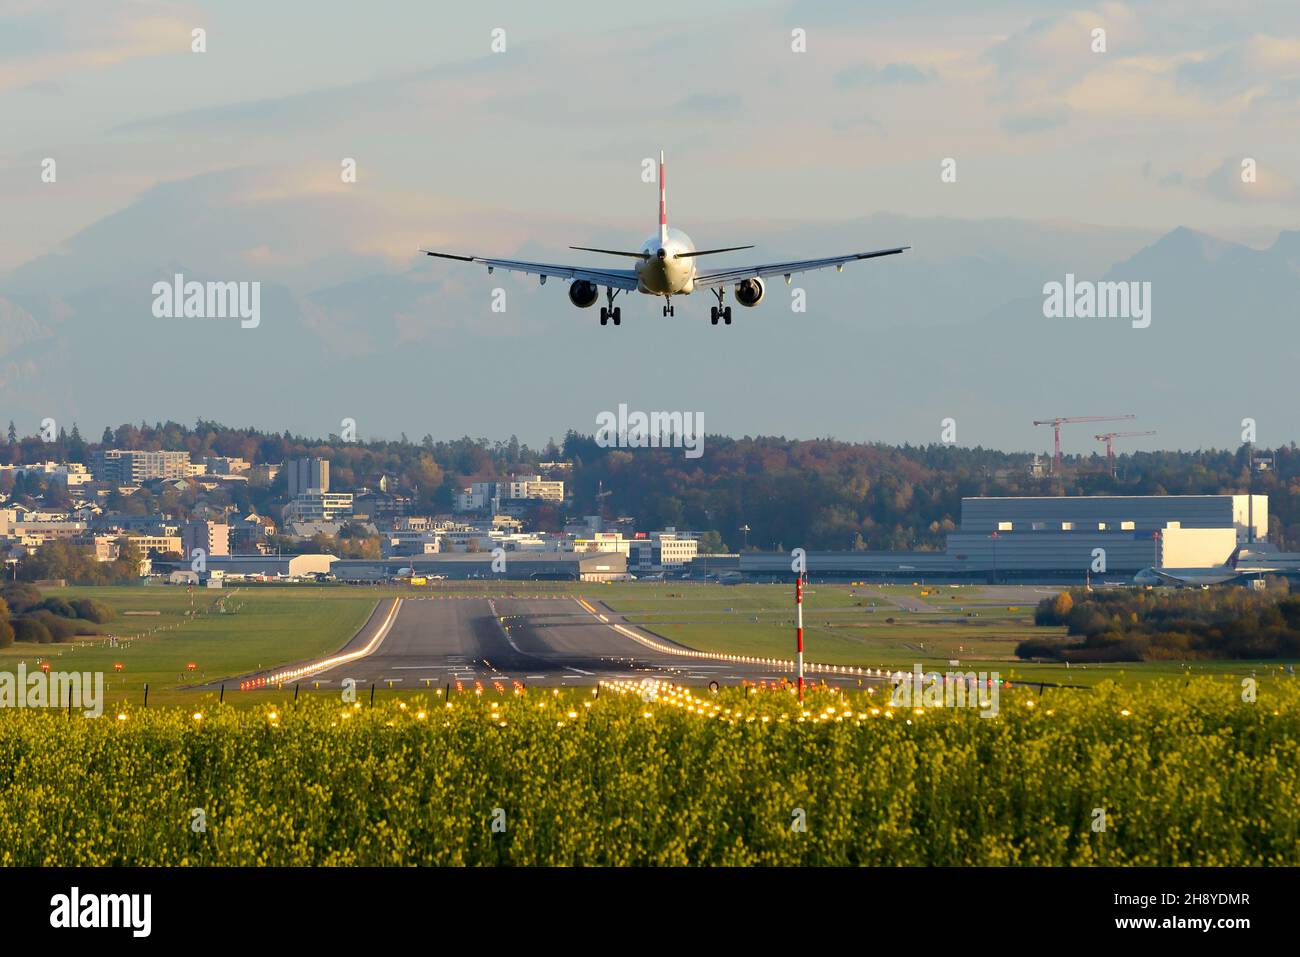 Zurich Airport runway with Swiss Air aircraft landing. Airport located in Kloten, Zurich serving as a hub for air travel. Airplane on final approach. Stock Photo